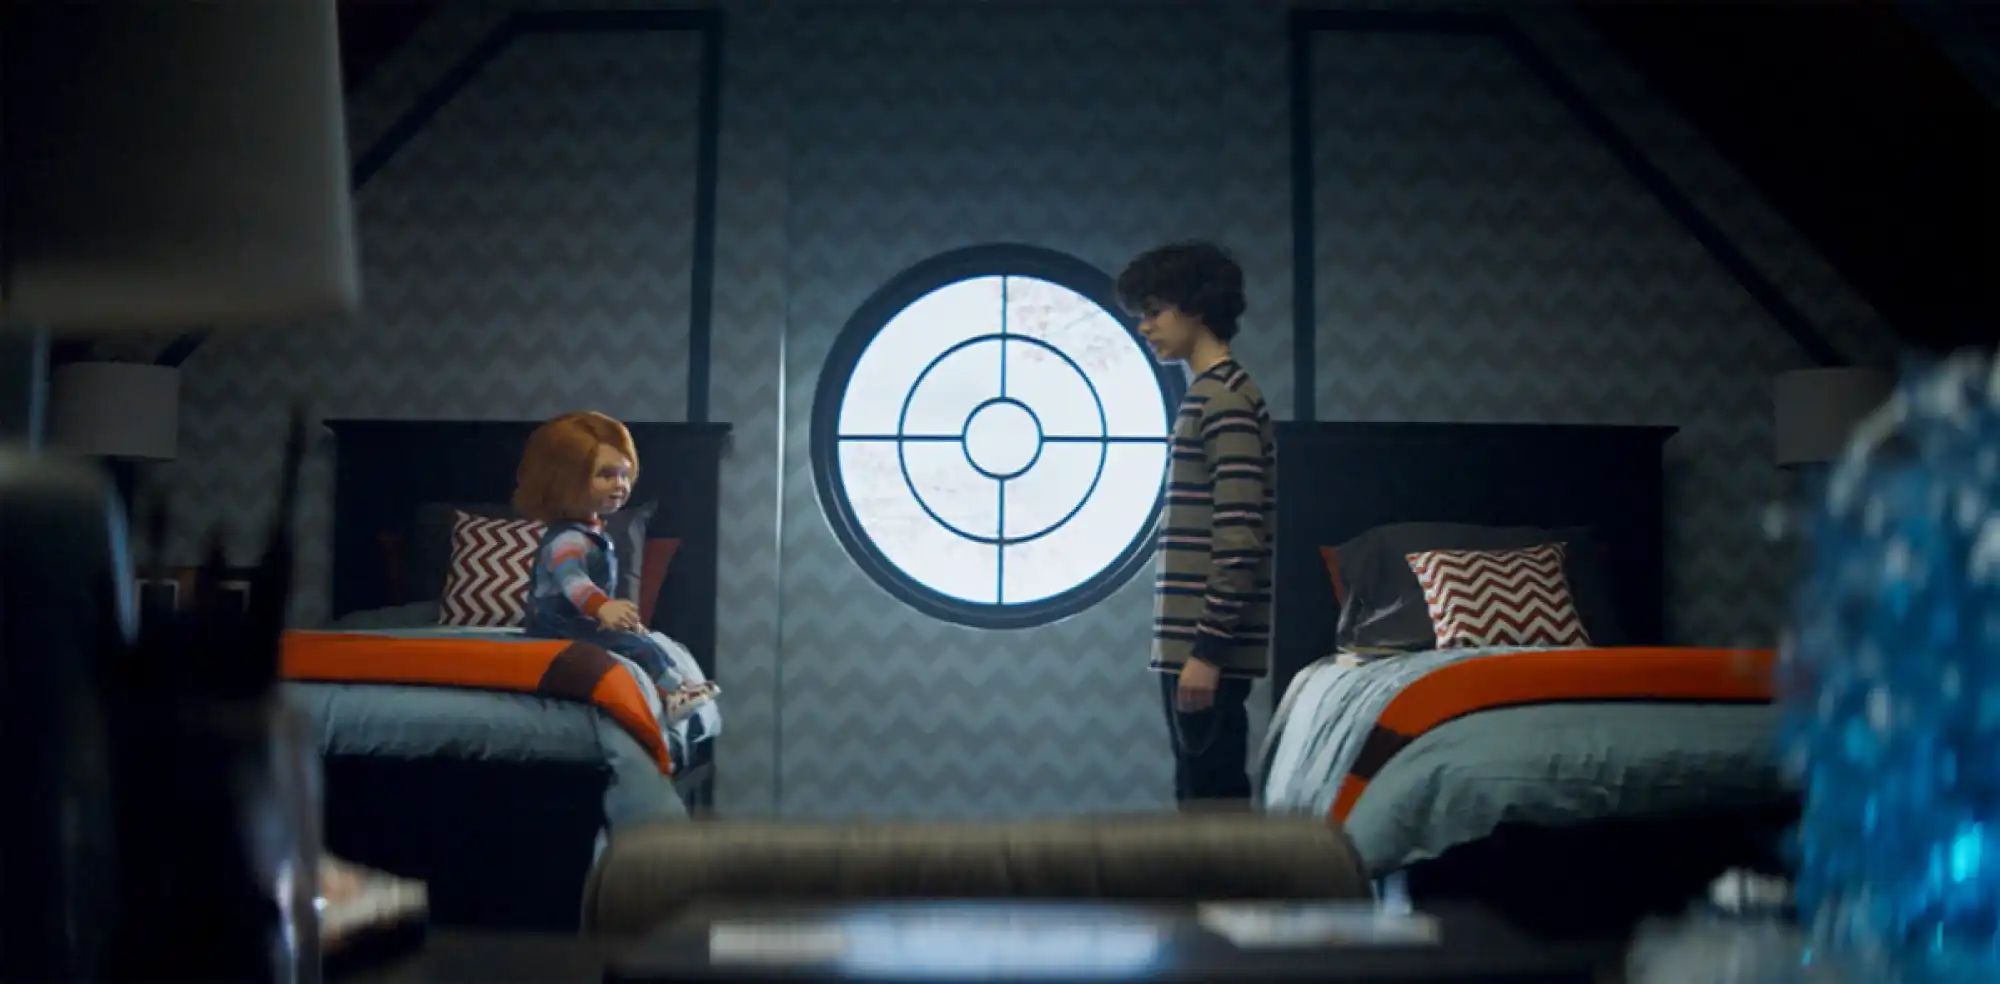 Chucky and Jake talking in Junior's house in Chucky season 1